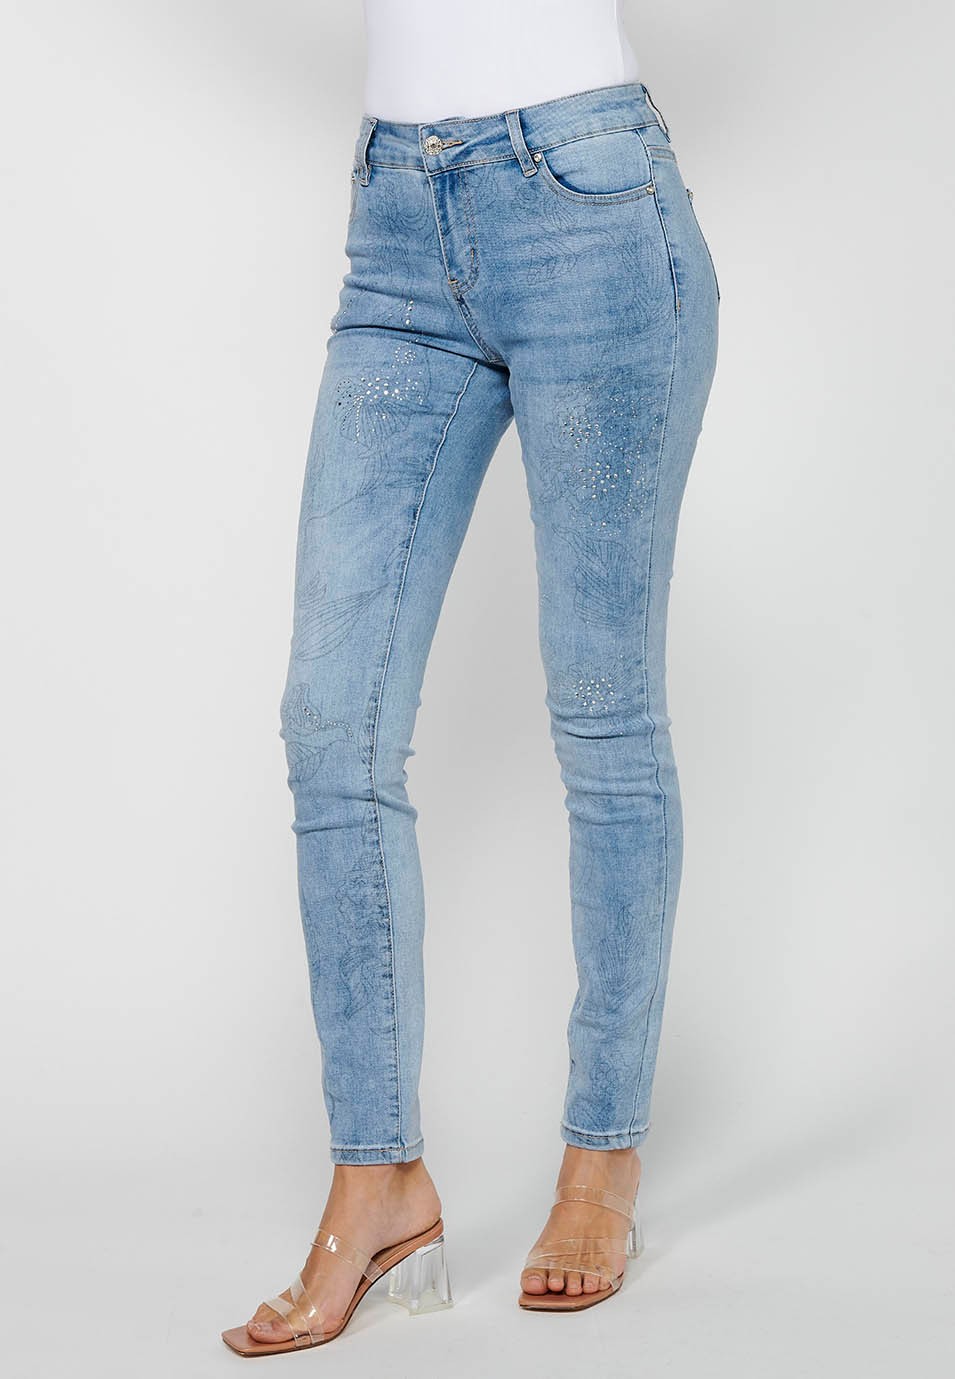 Long slim denim pants with floral details and front closure with zipper and button in Light Blue for Women 3